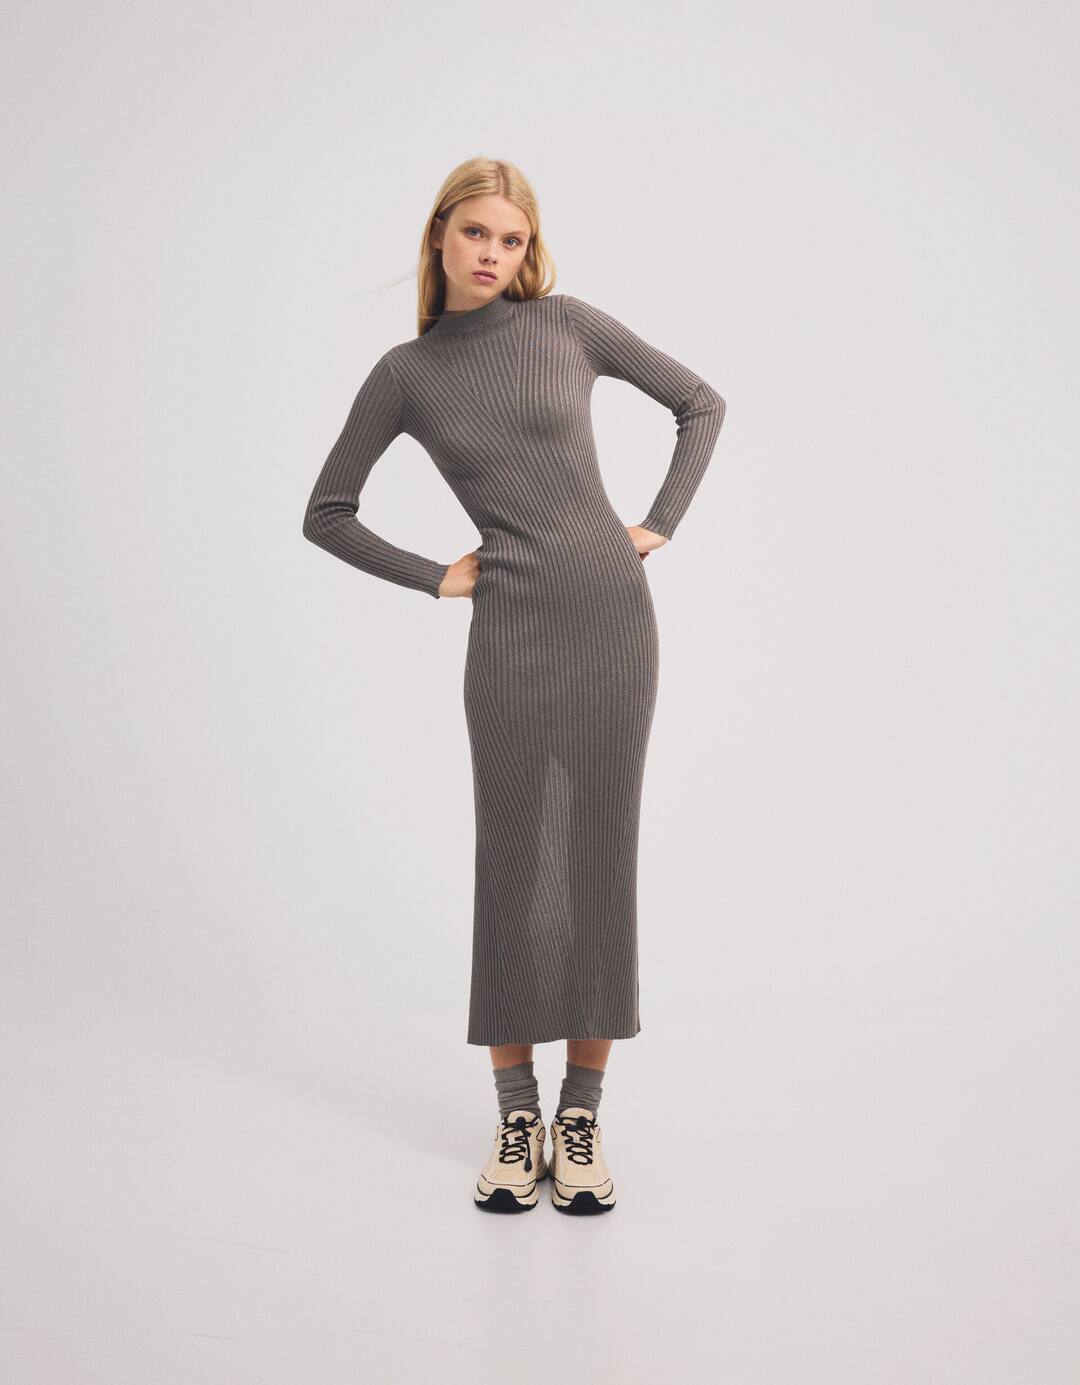 Shimmery knit high neck midi dress with long sleeves